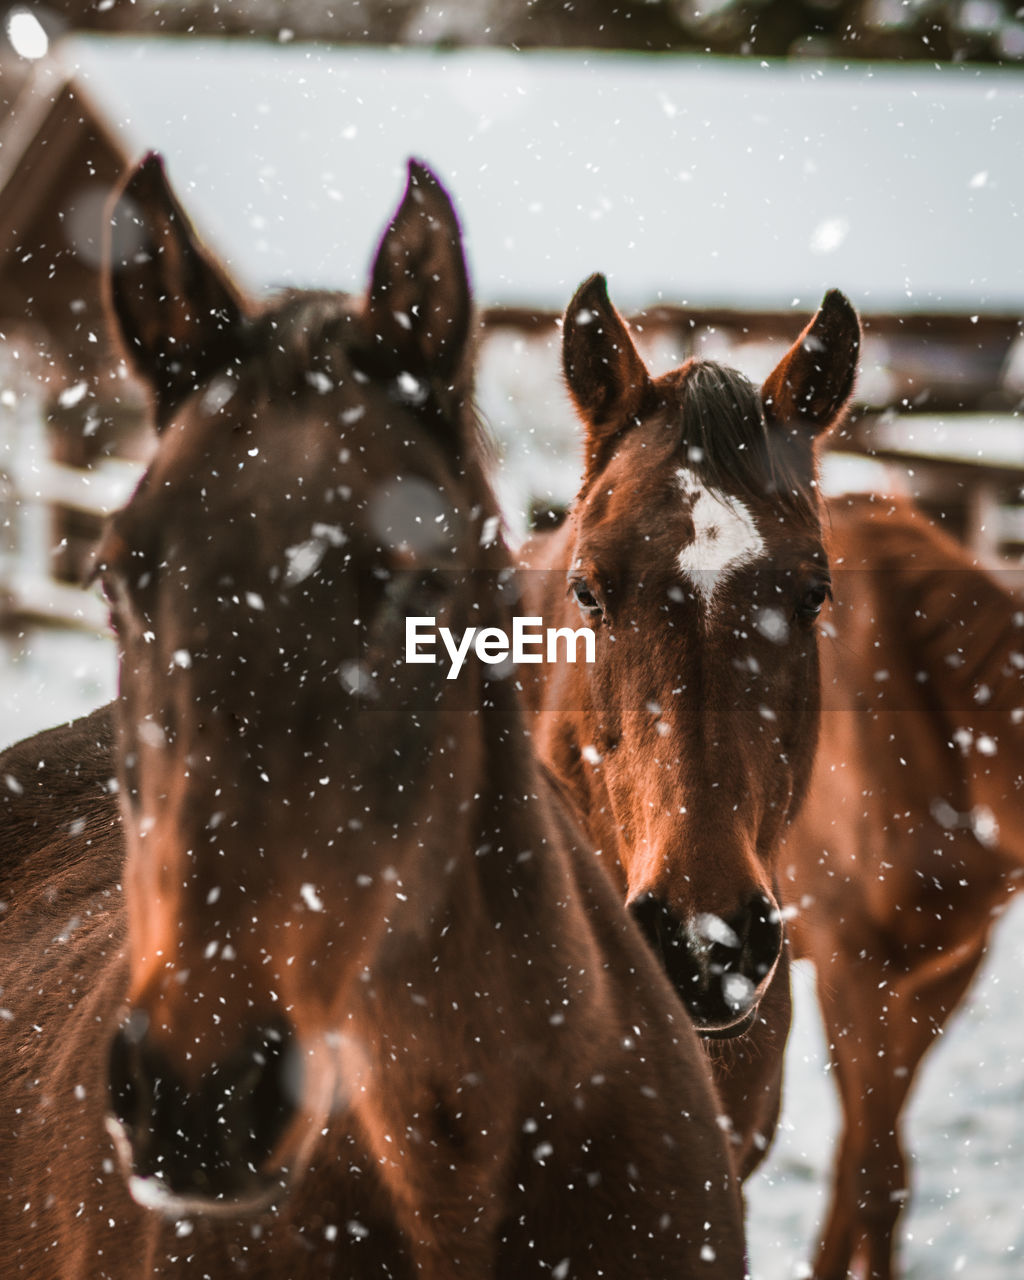 Horses during winter